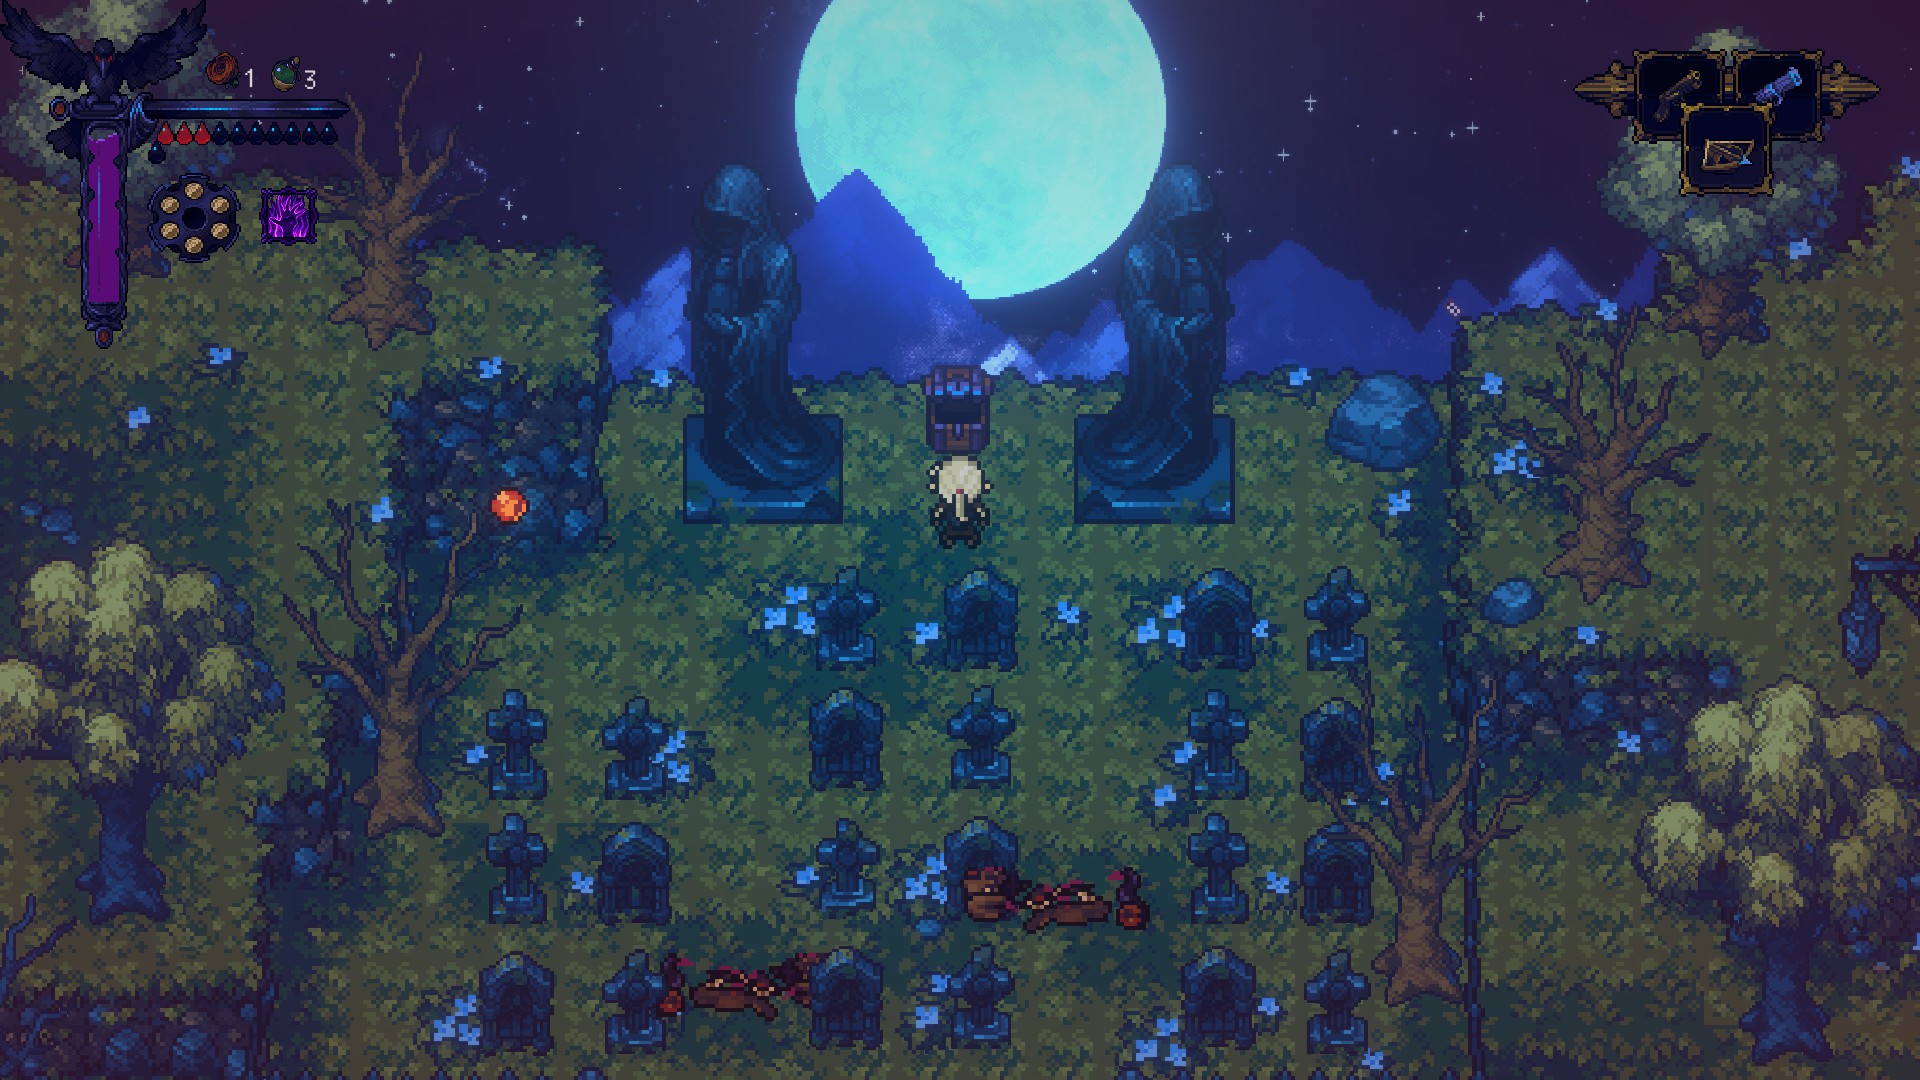 A graveyard with two large hooded statues near a ledge. A bright blue moon can be seen in the distant and our protagonist is staring out towards it. a chest has been opened.